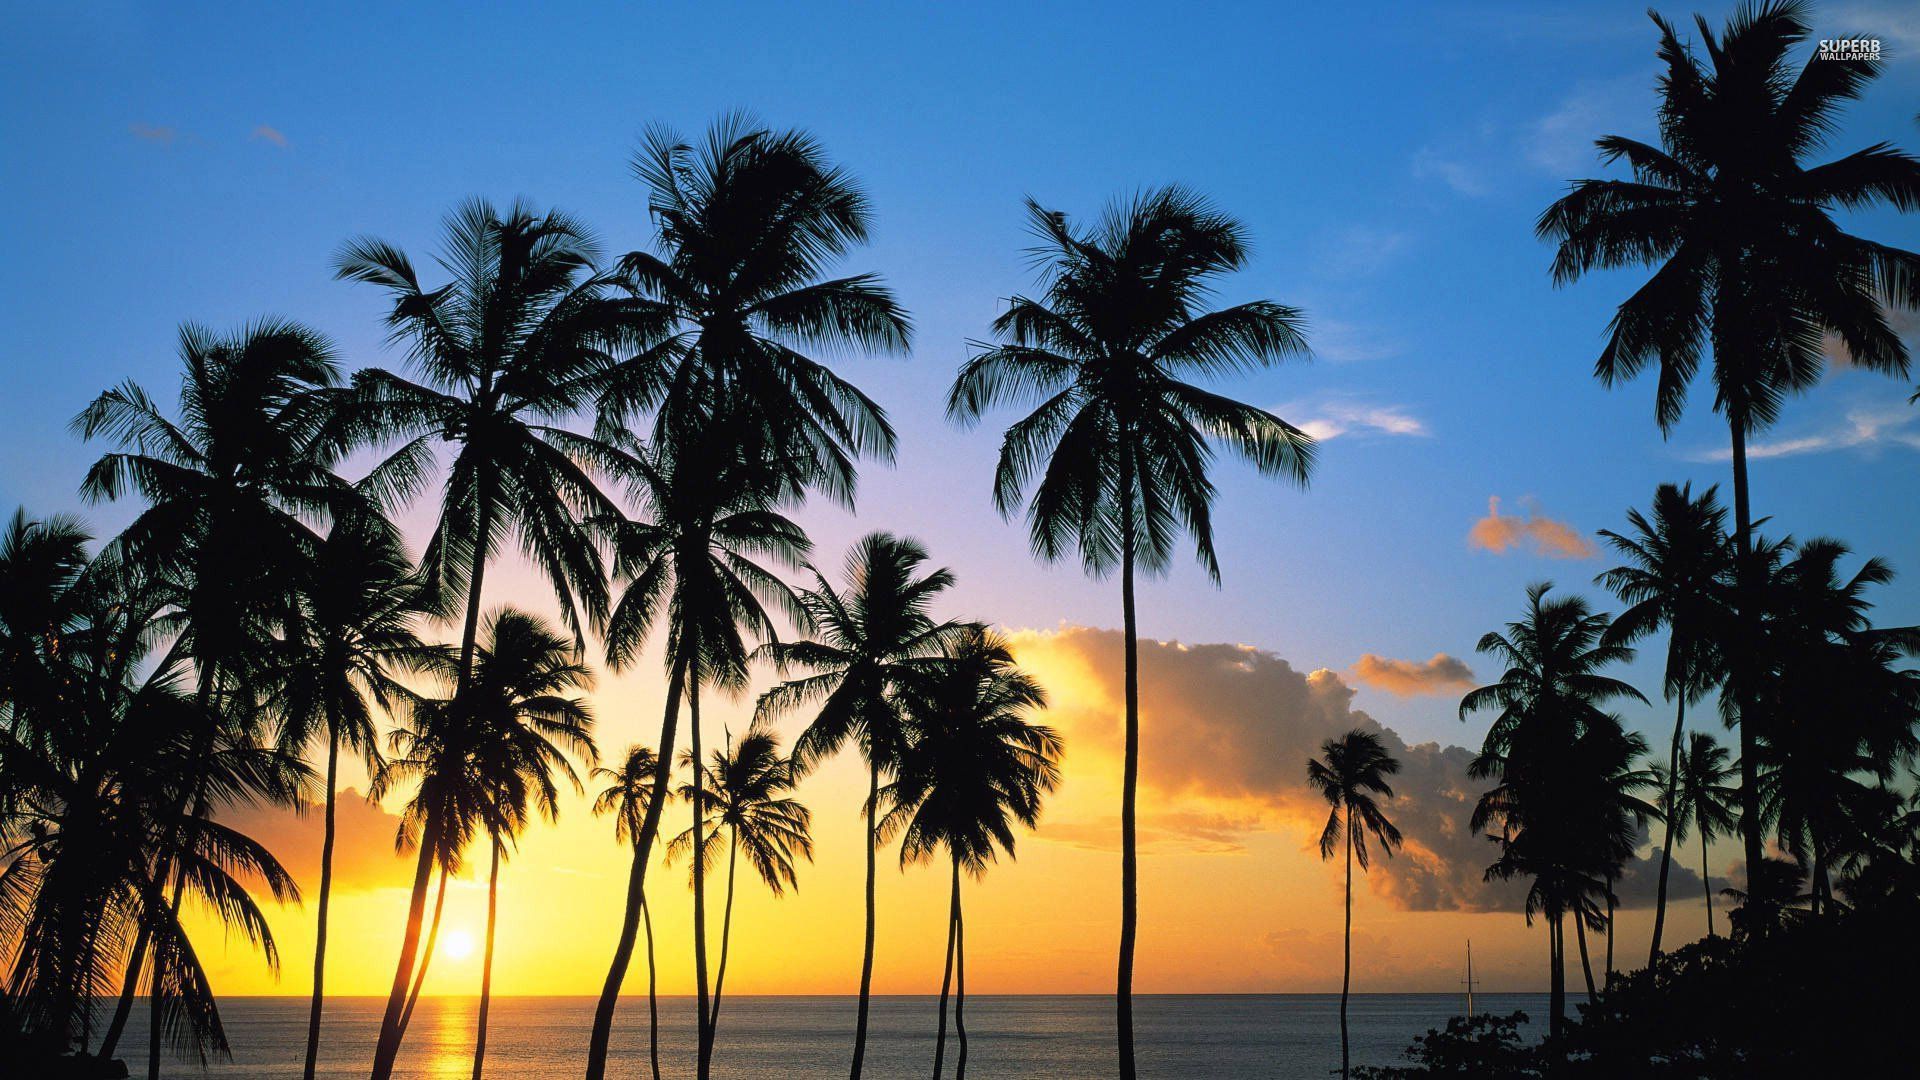 Palm tree silhouettes in the sunset wallpaper - Beach wallpapers